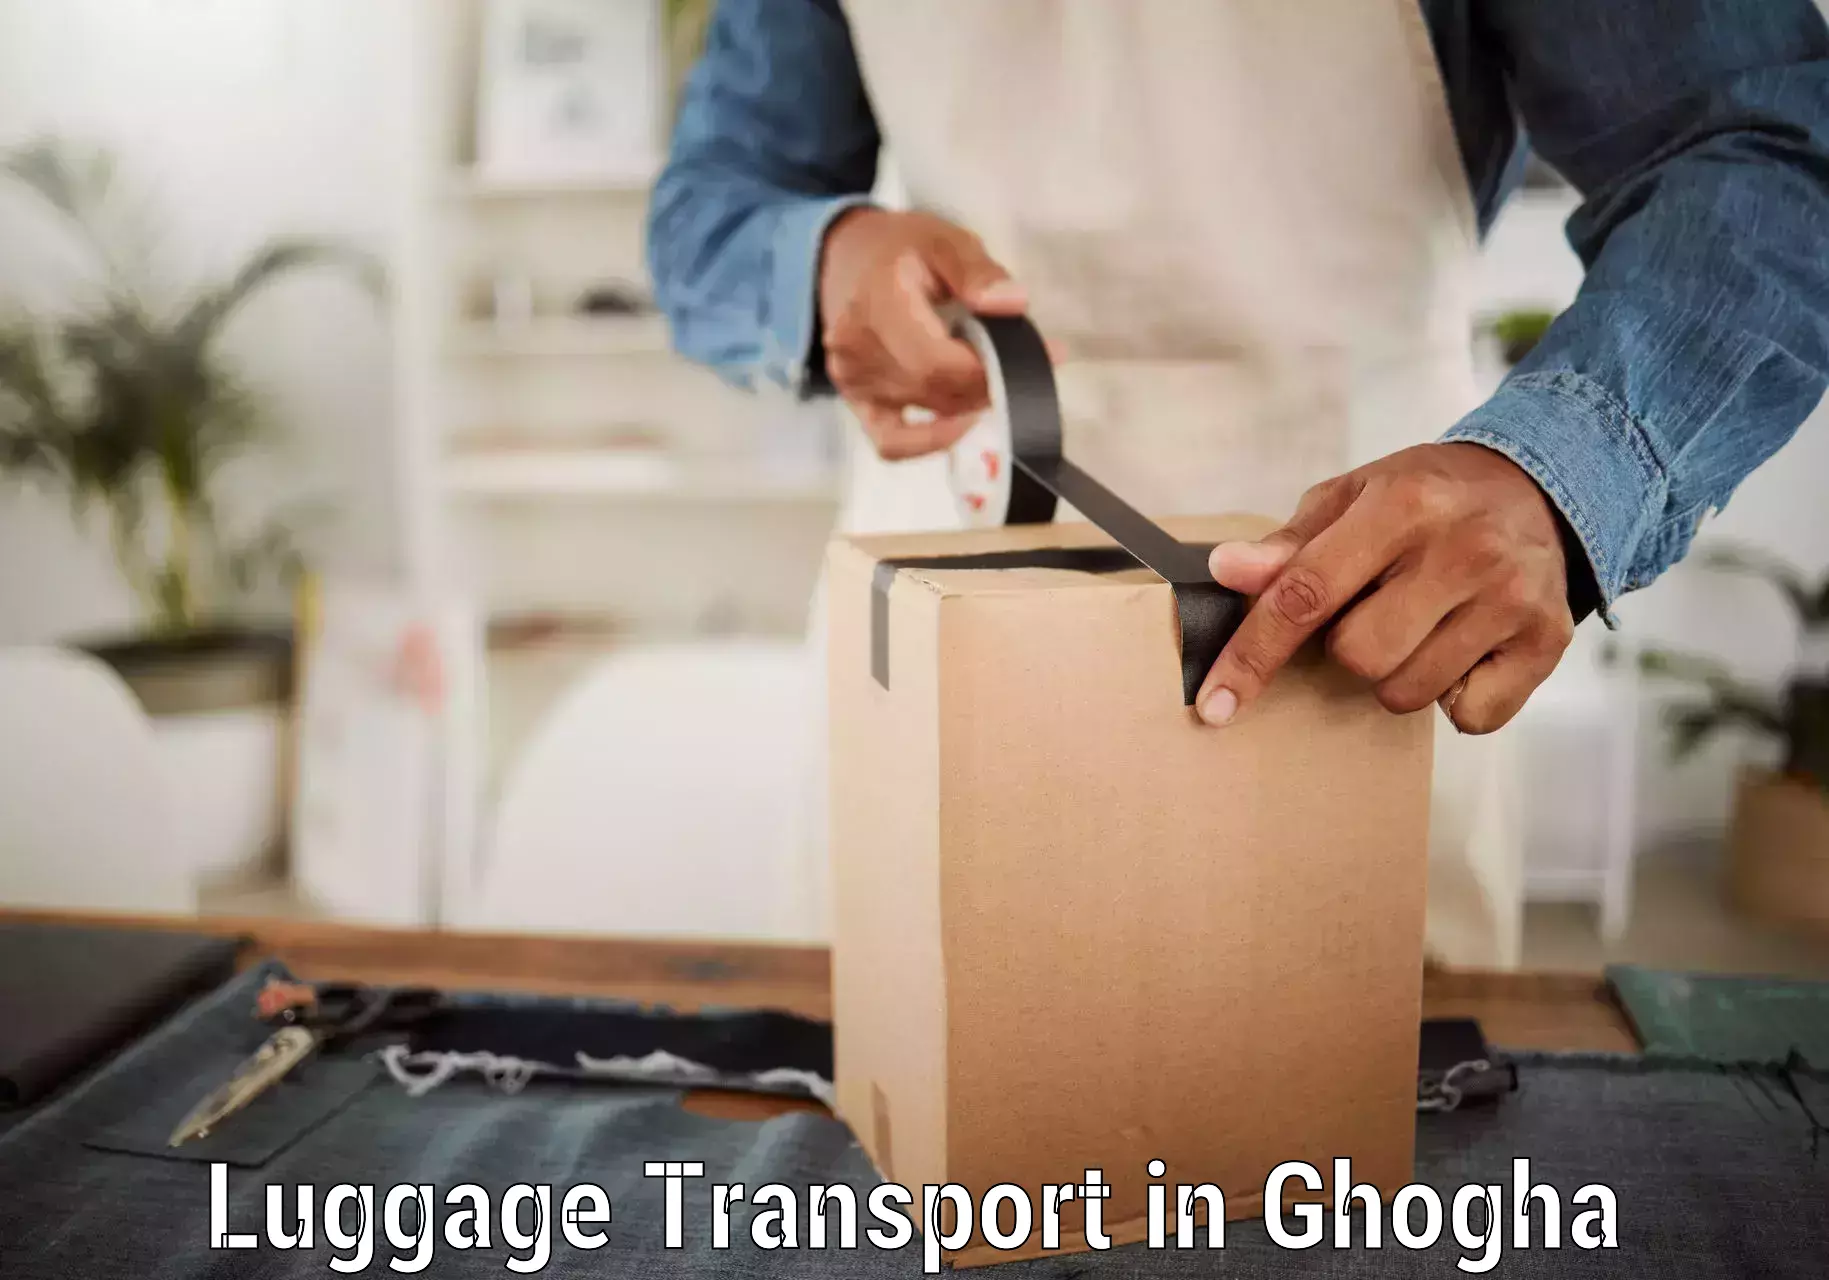 Luggage shipping rates in Ghogha